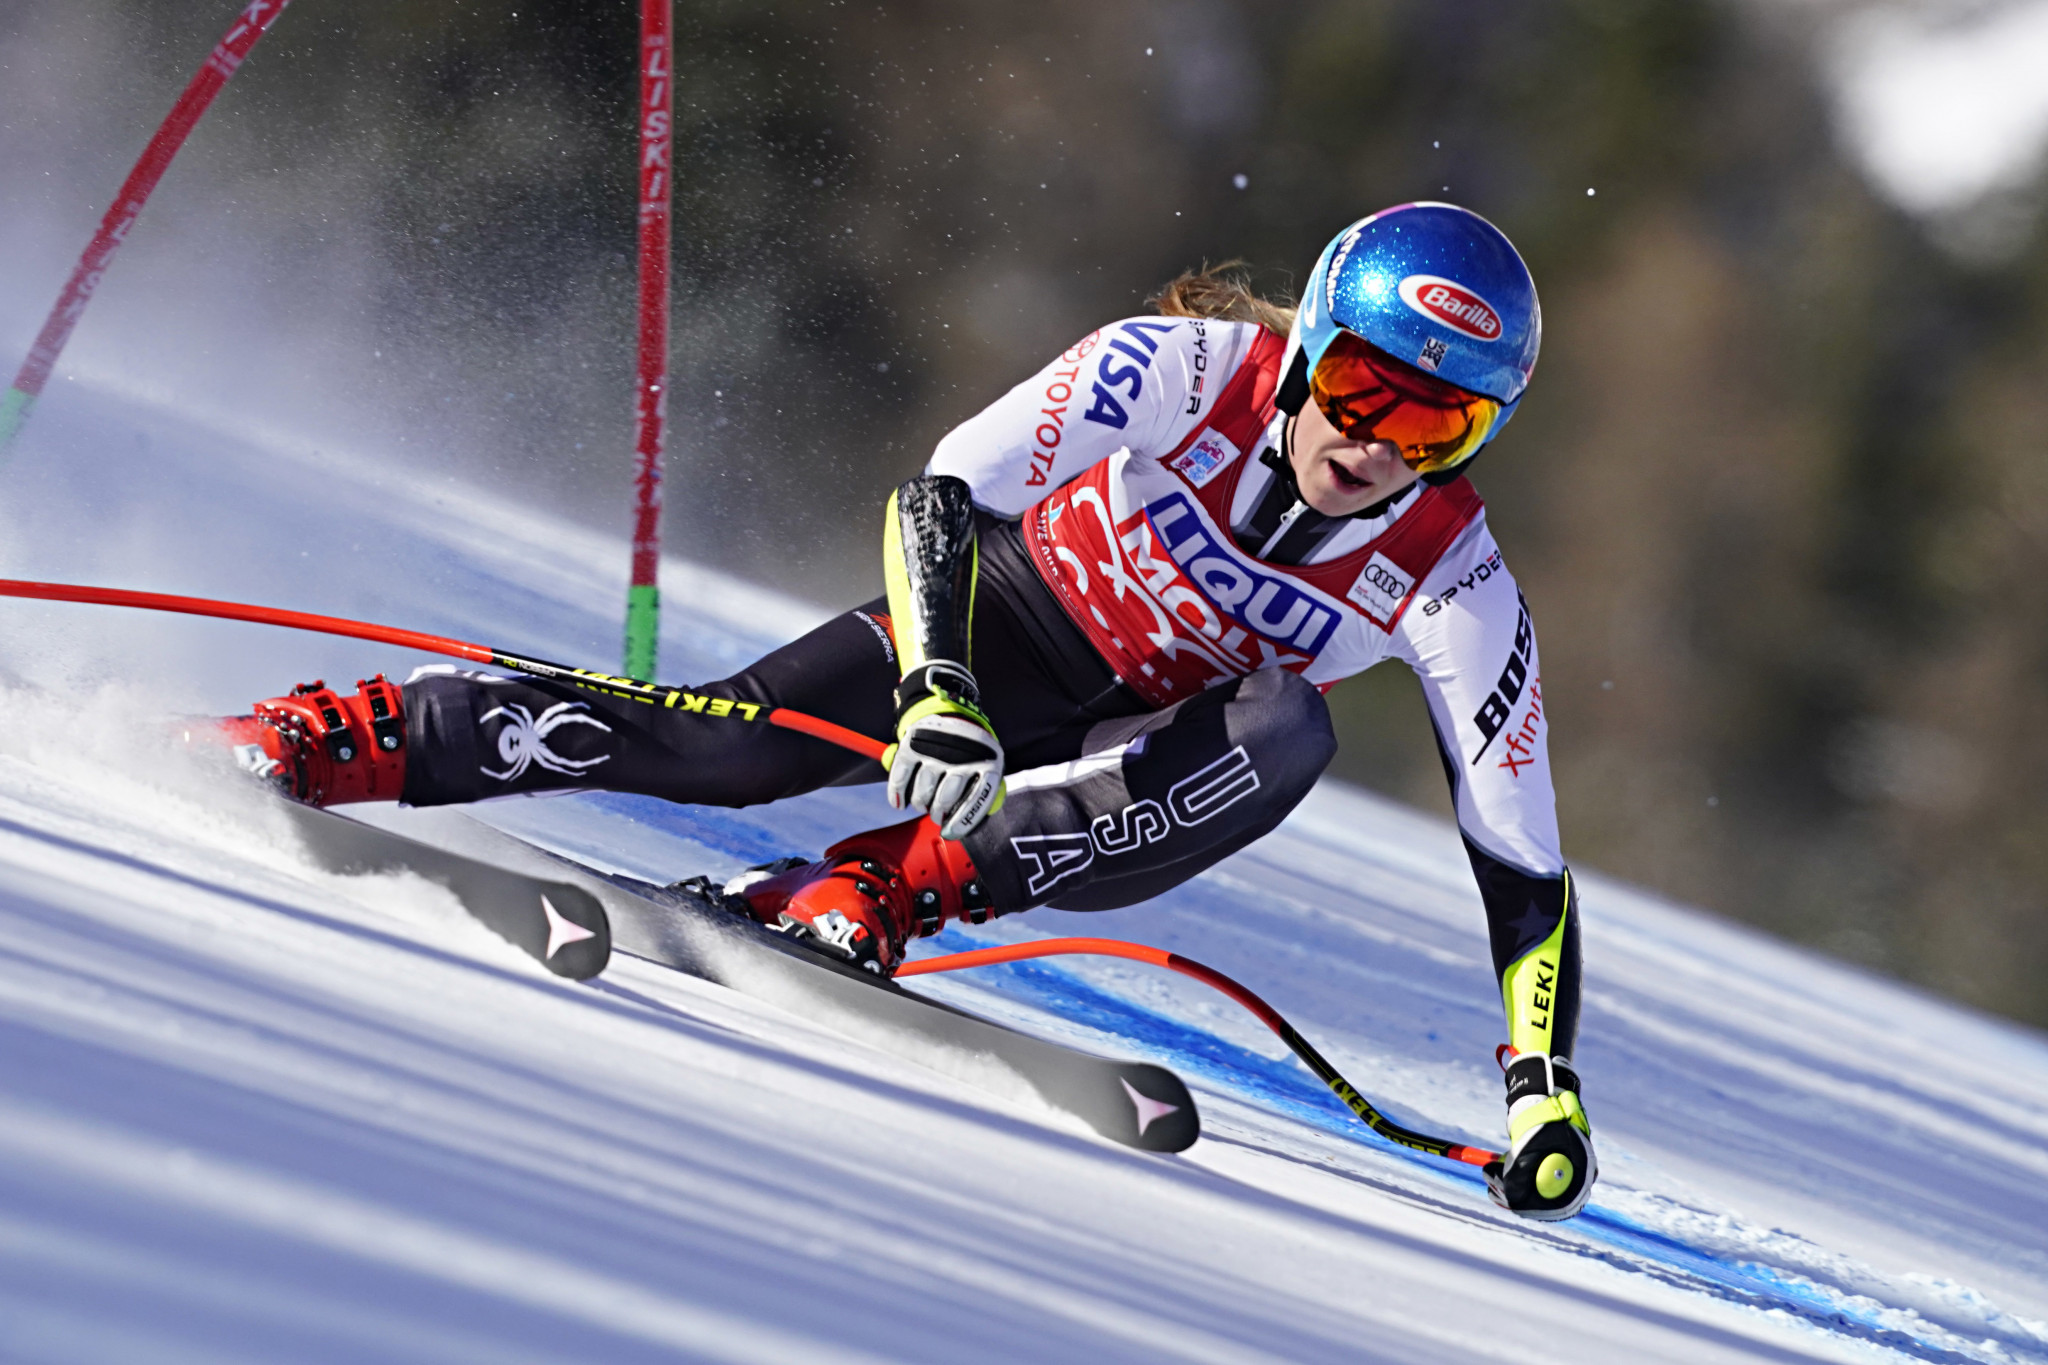 American star Mikaela Shiffrin continued her dominant run of form with victory in the women's super-G ©Getty Images